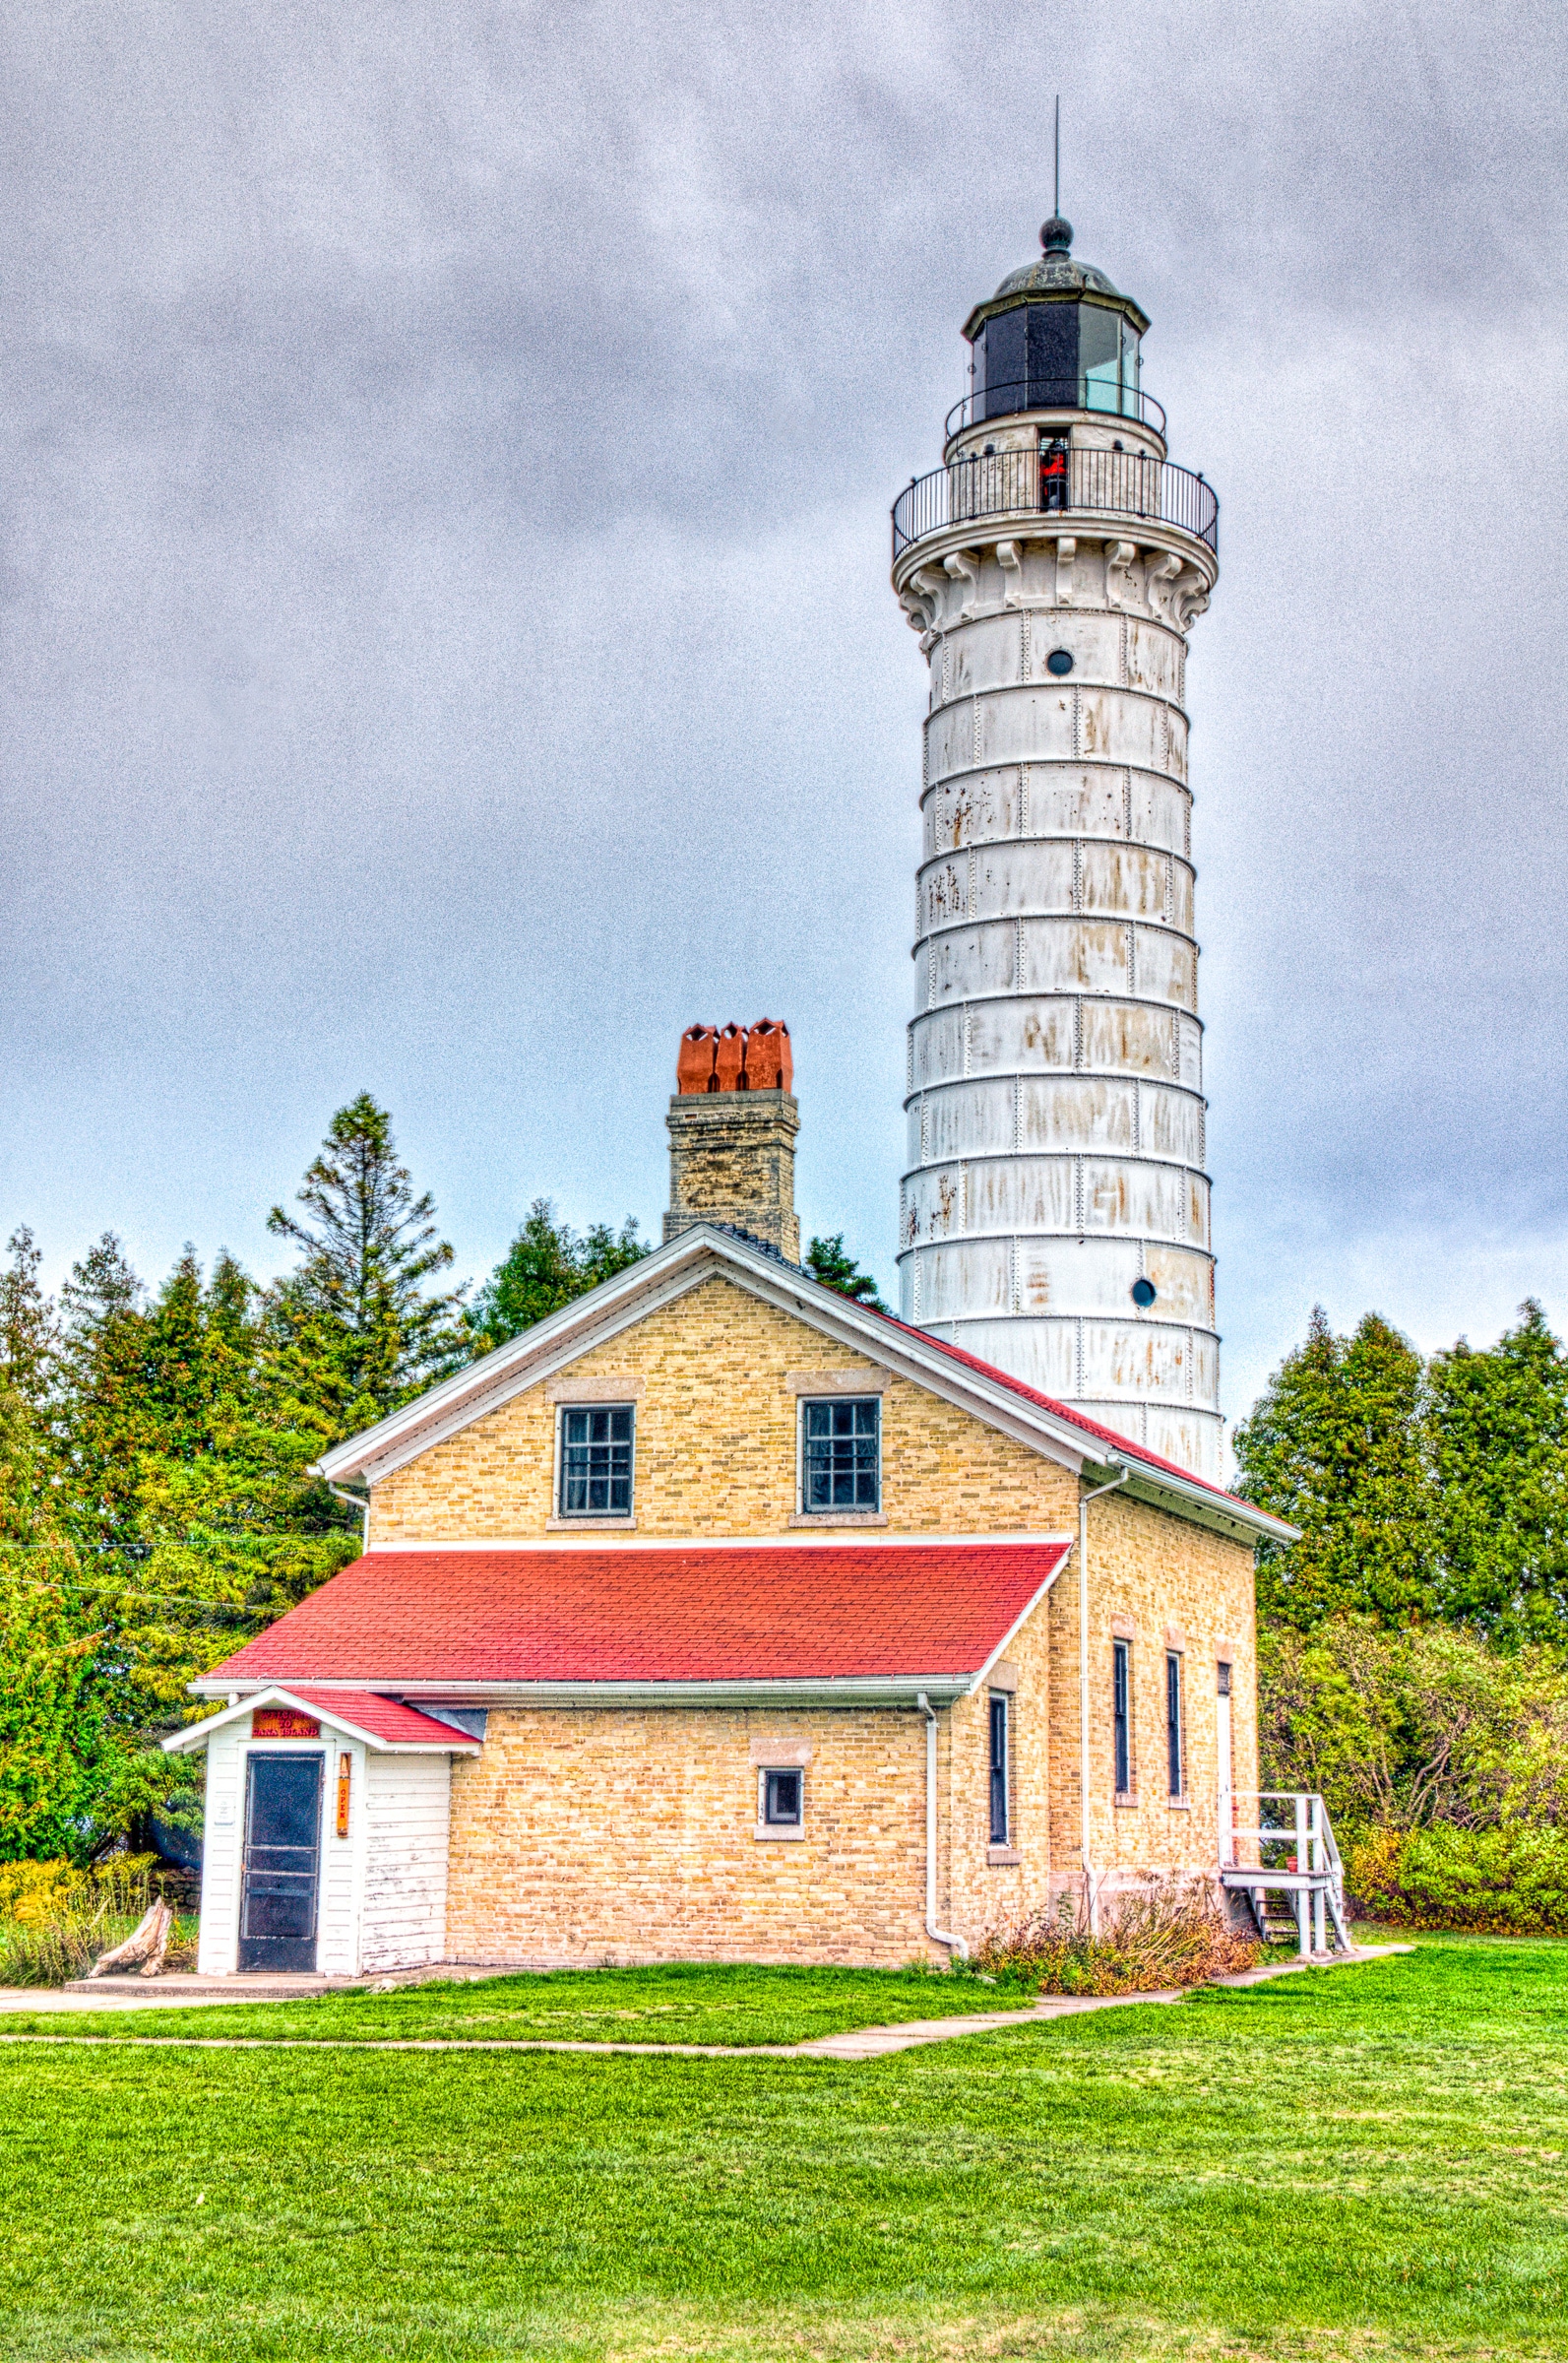 Overview of the Cana Island Lighthouse, north of Baileys Harbor, Wisconsin, on Lake Michigan.